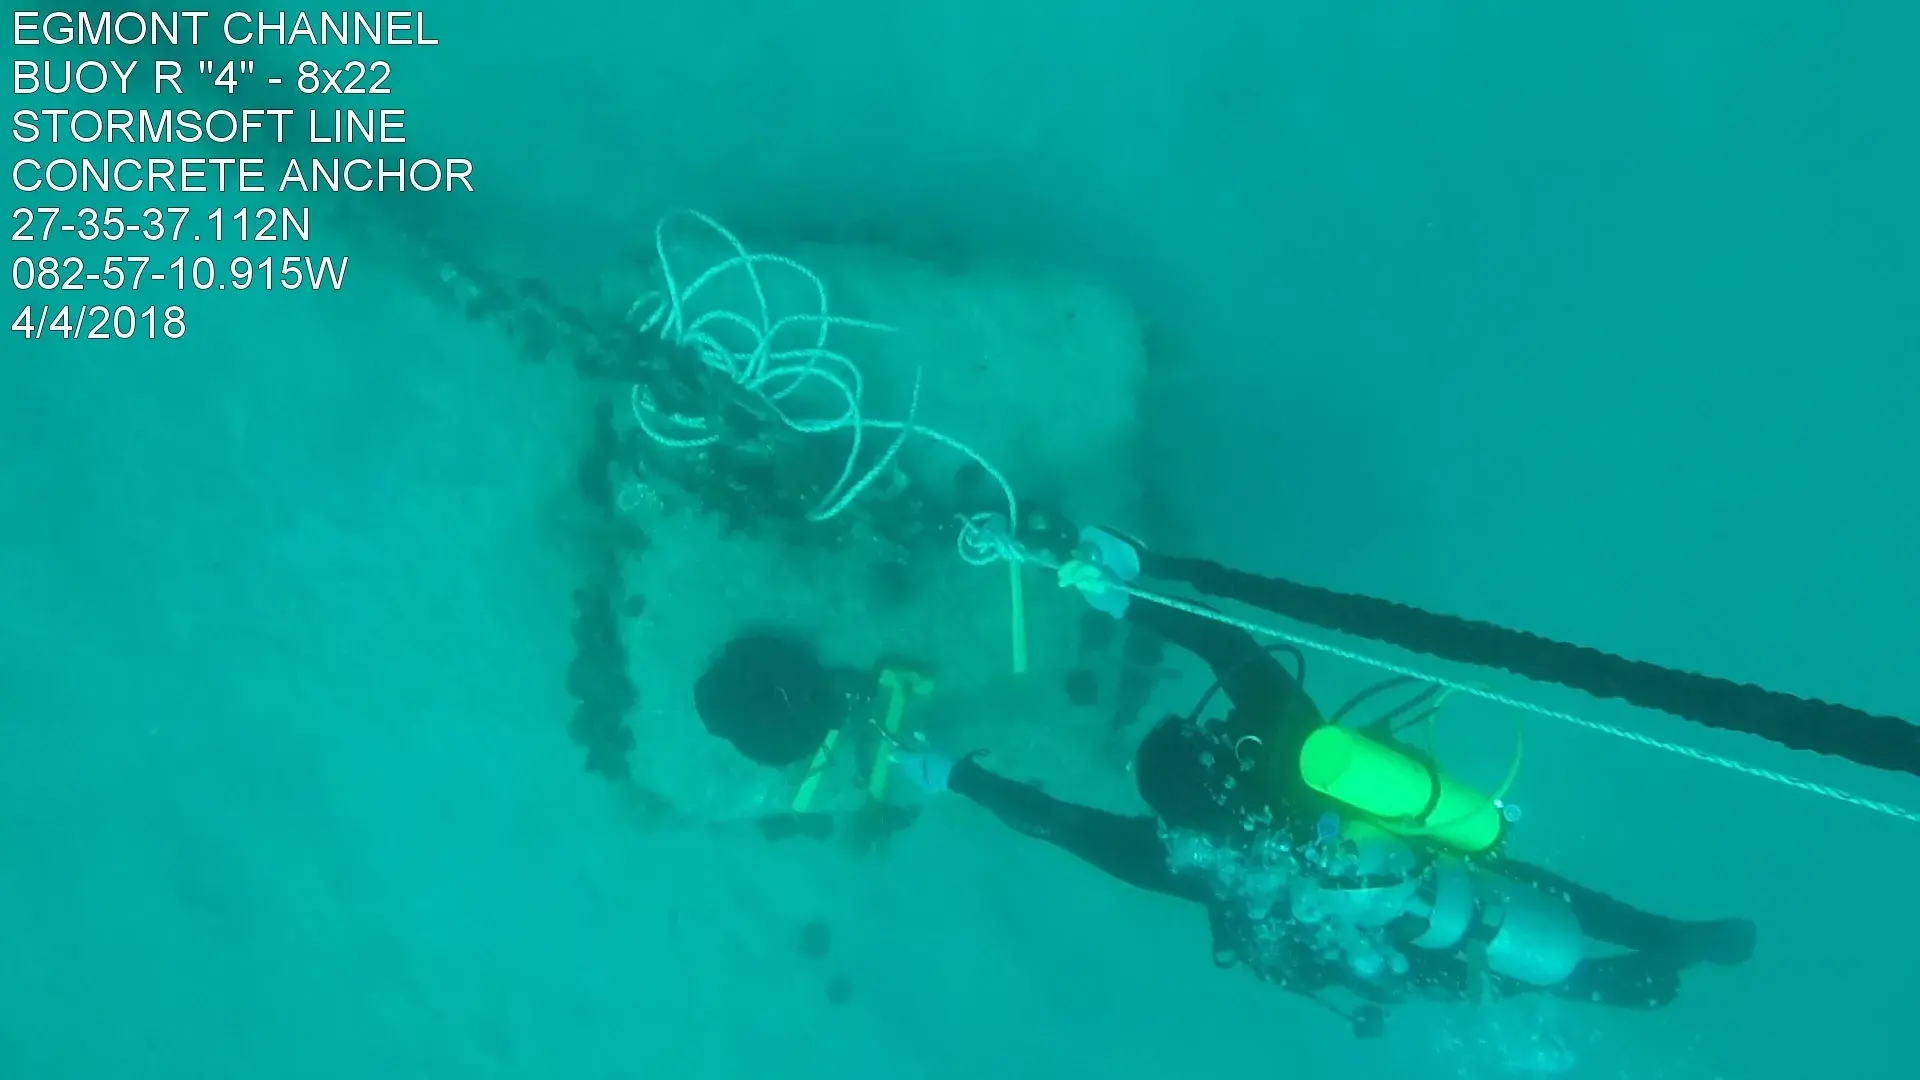 A look from above, a diver attaches a StormSoft eco-mooring line to a concrete sinker. Underwater location: EGMONT CHannel; BUOY R "4" - 8x22; STORMSOFT LINE; CONCRETE ANCHOR; 27-35-37.112n; OB2-57-10.915W; 4/4/2018